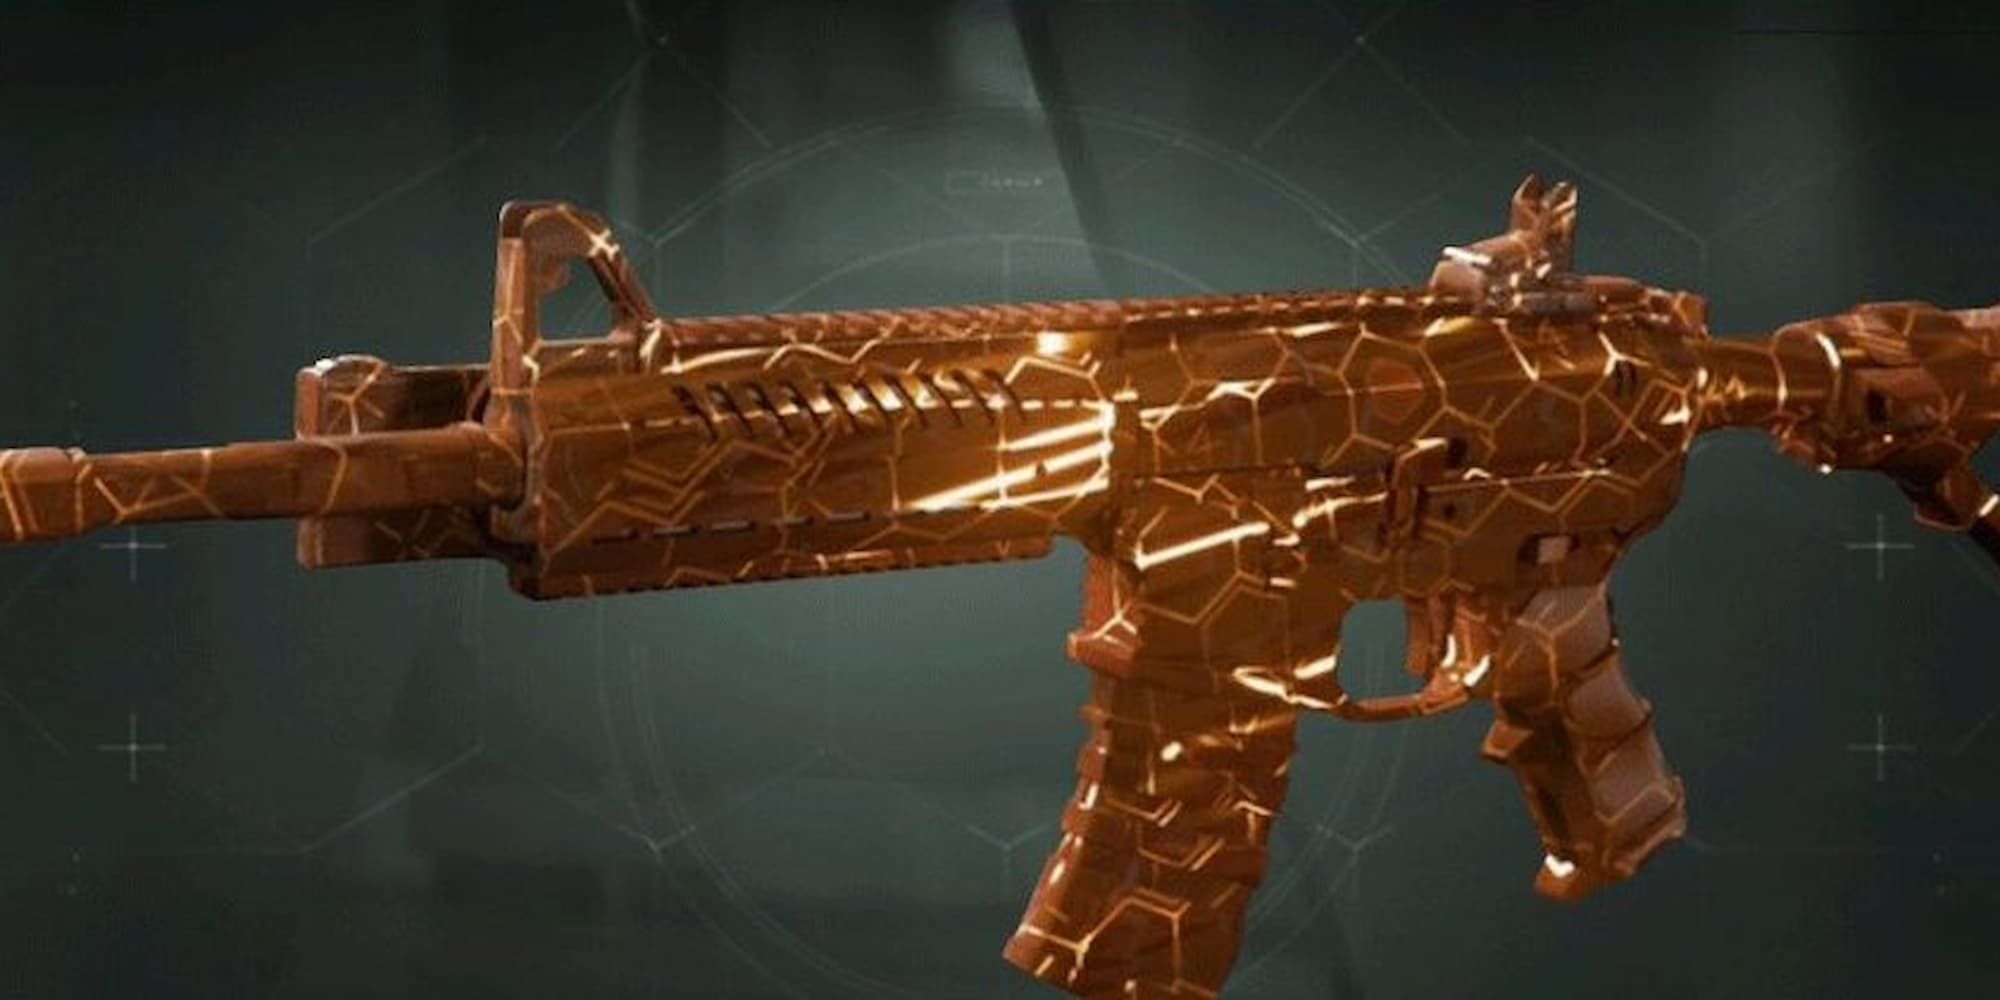 The NV4 Flatline variation has an almost volcanic appearance to its weapon skin.